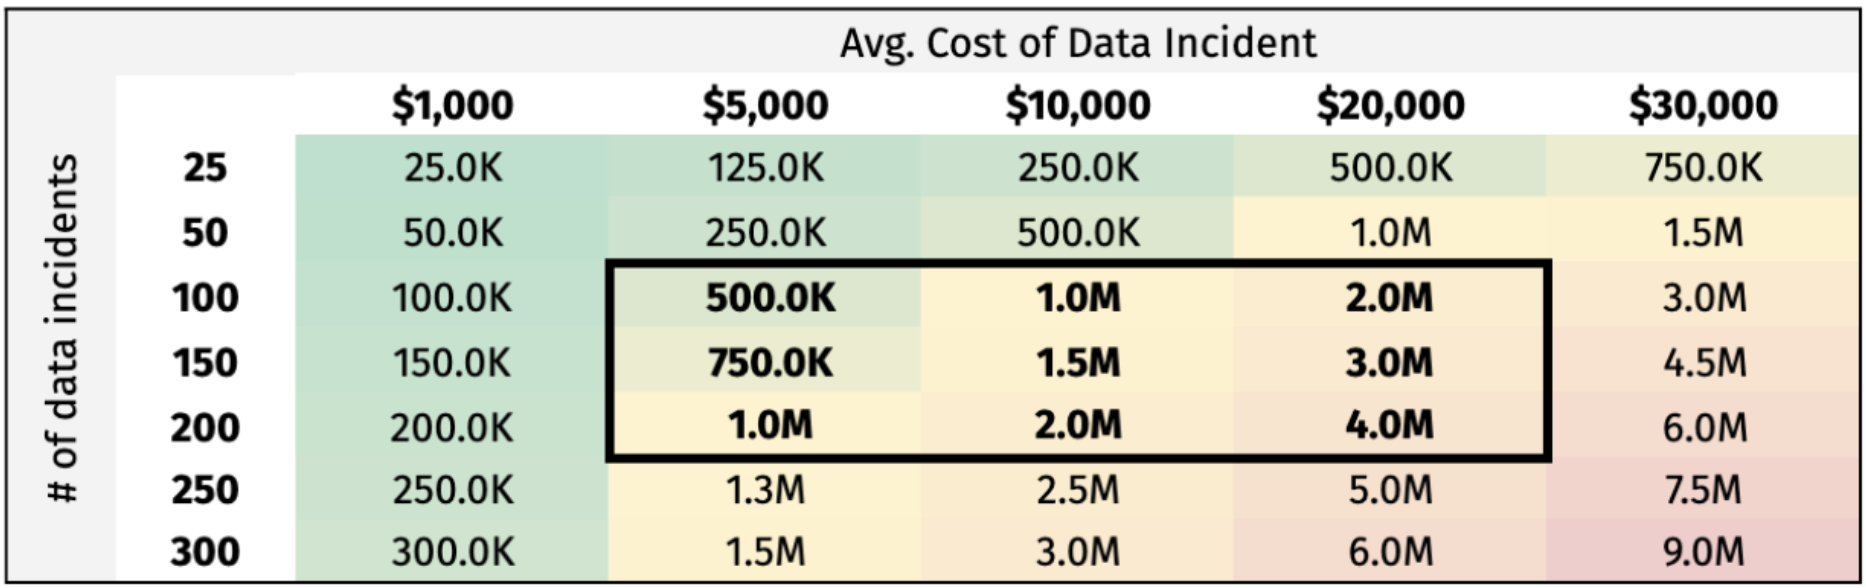 cost-of-data-incidents